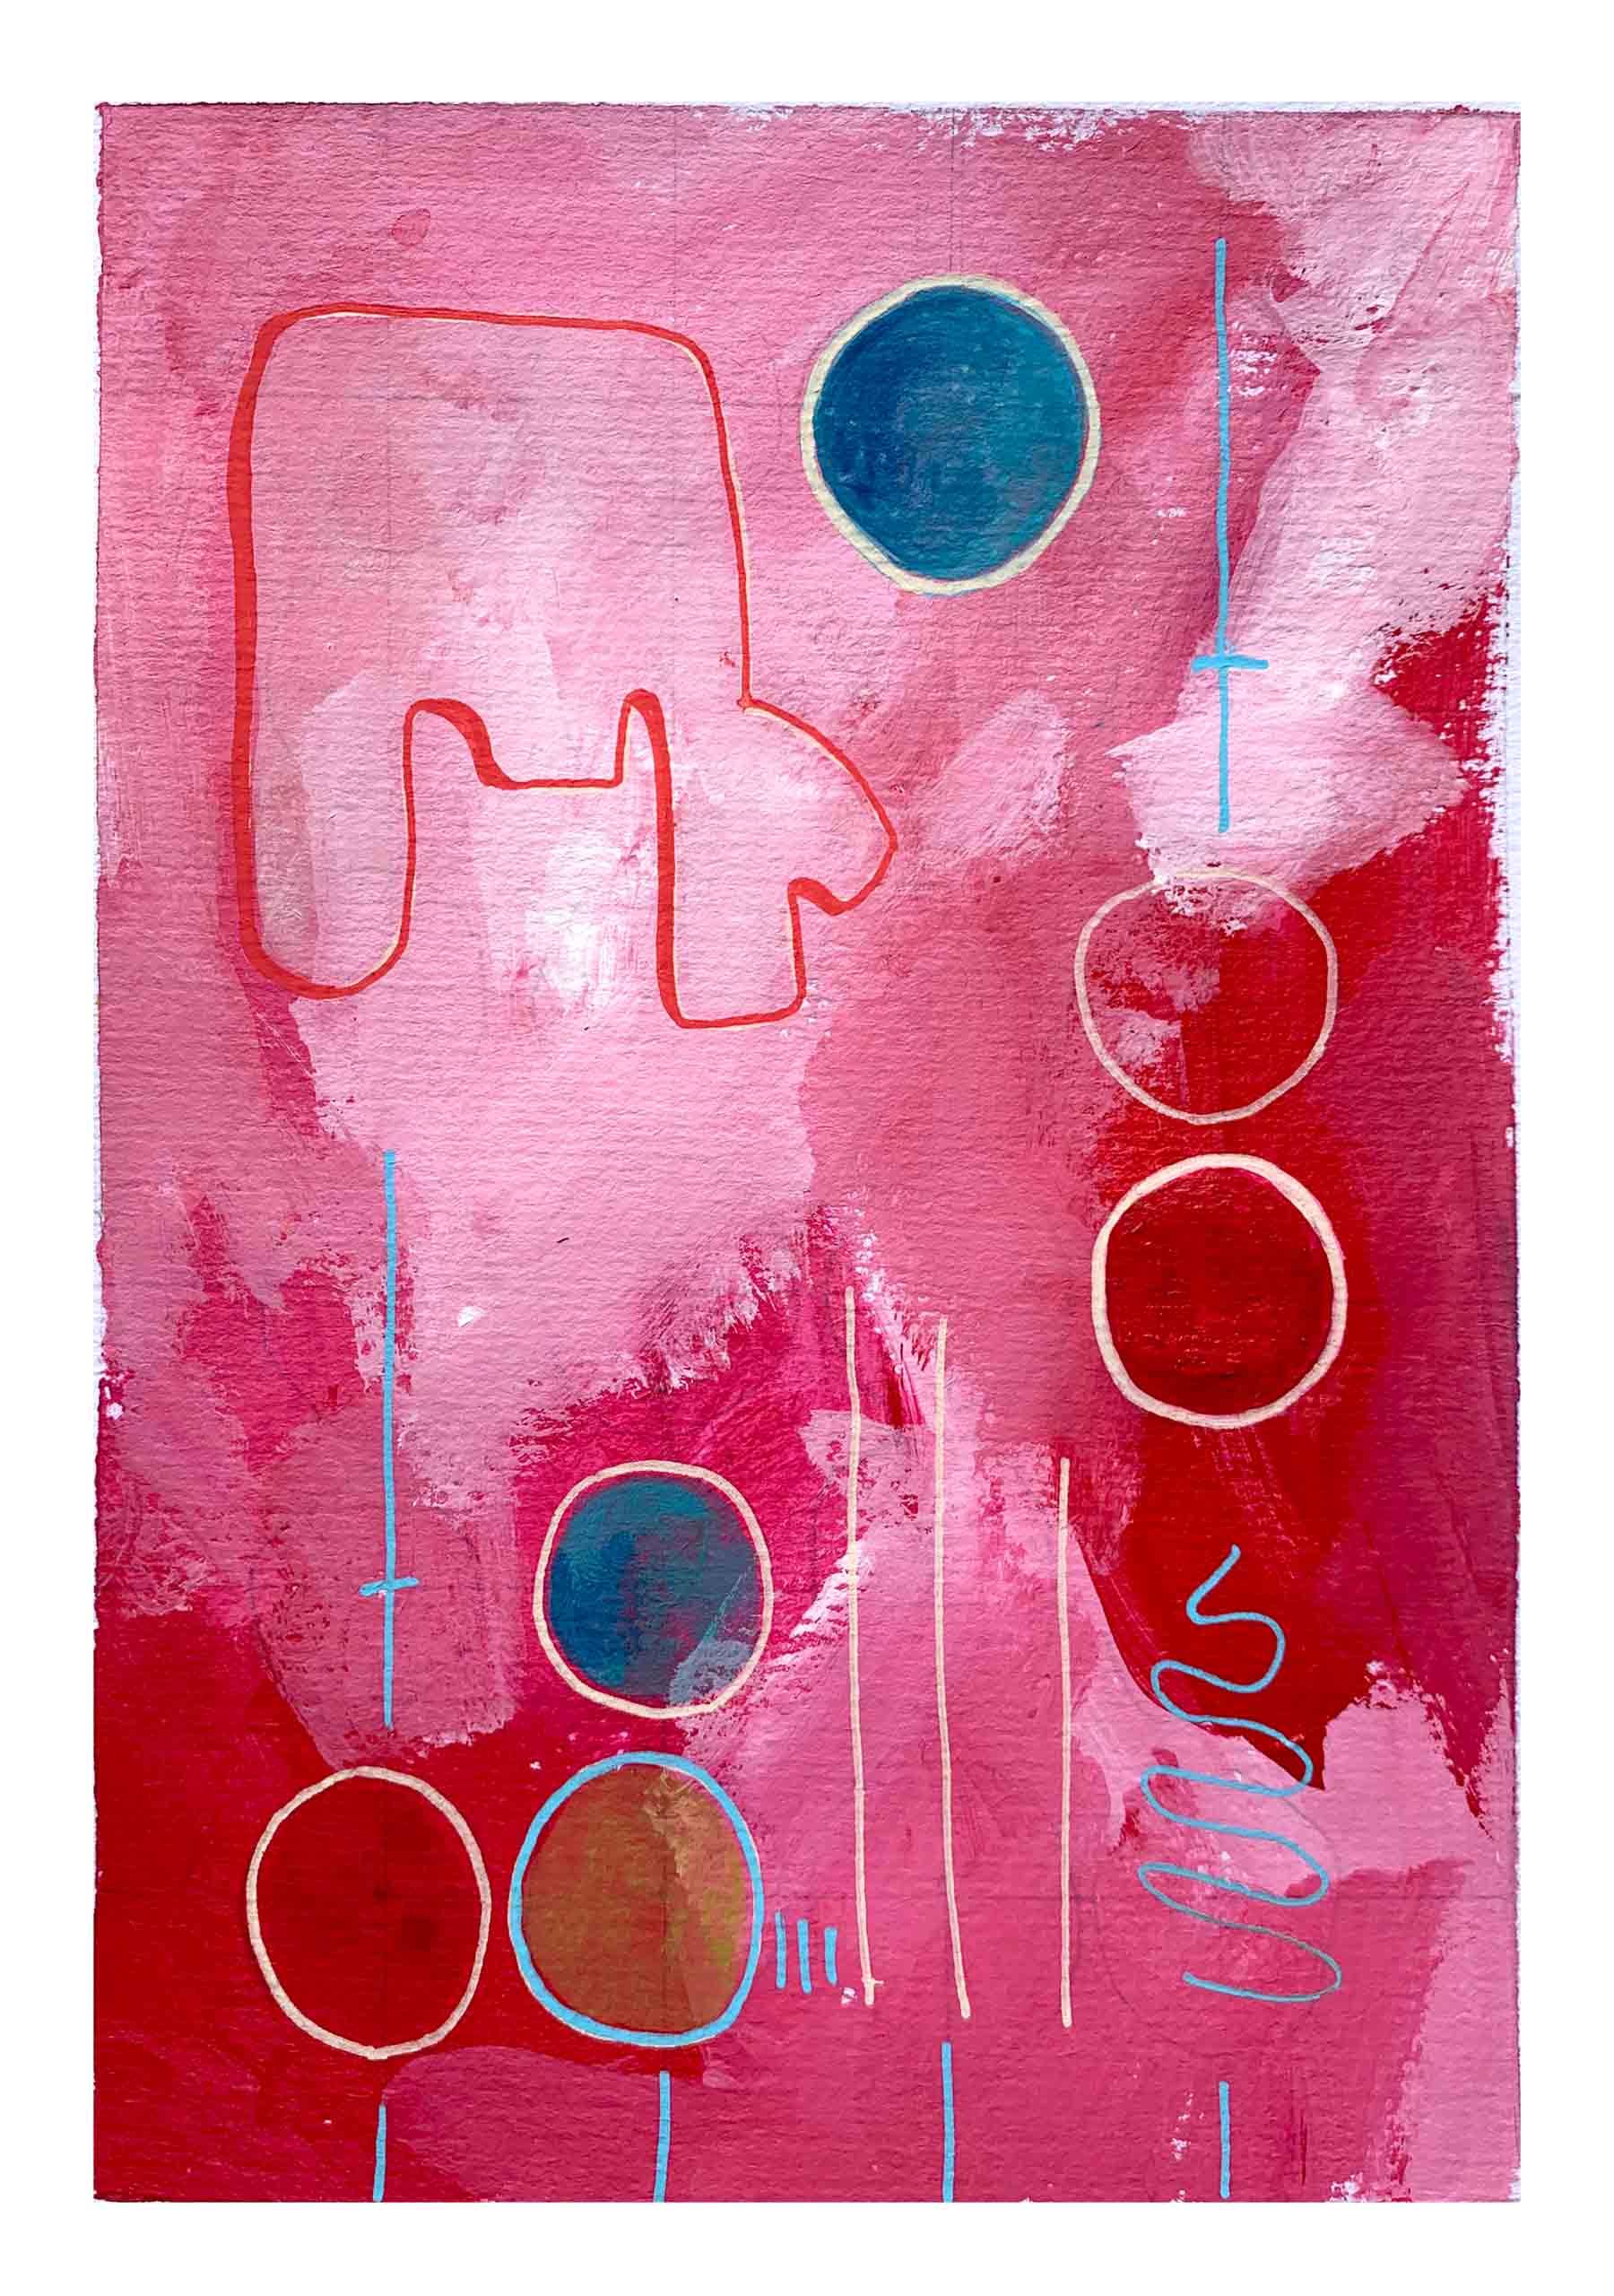 art every day number 623 painting gouache acrylic pink iii abstract